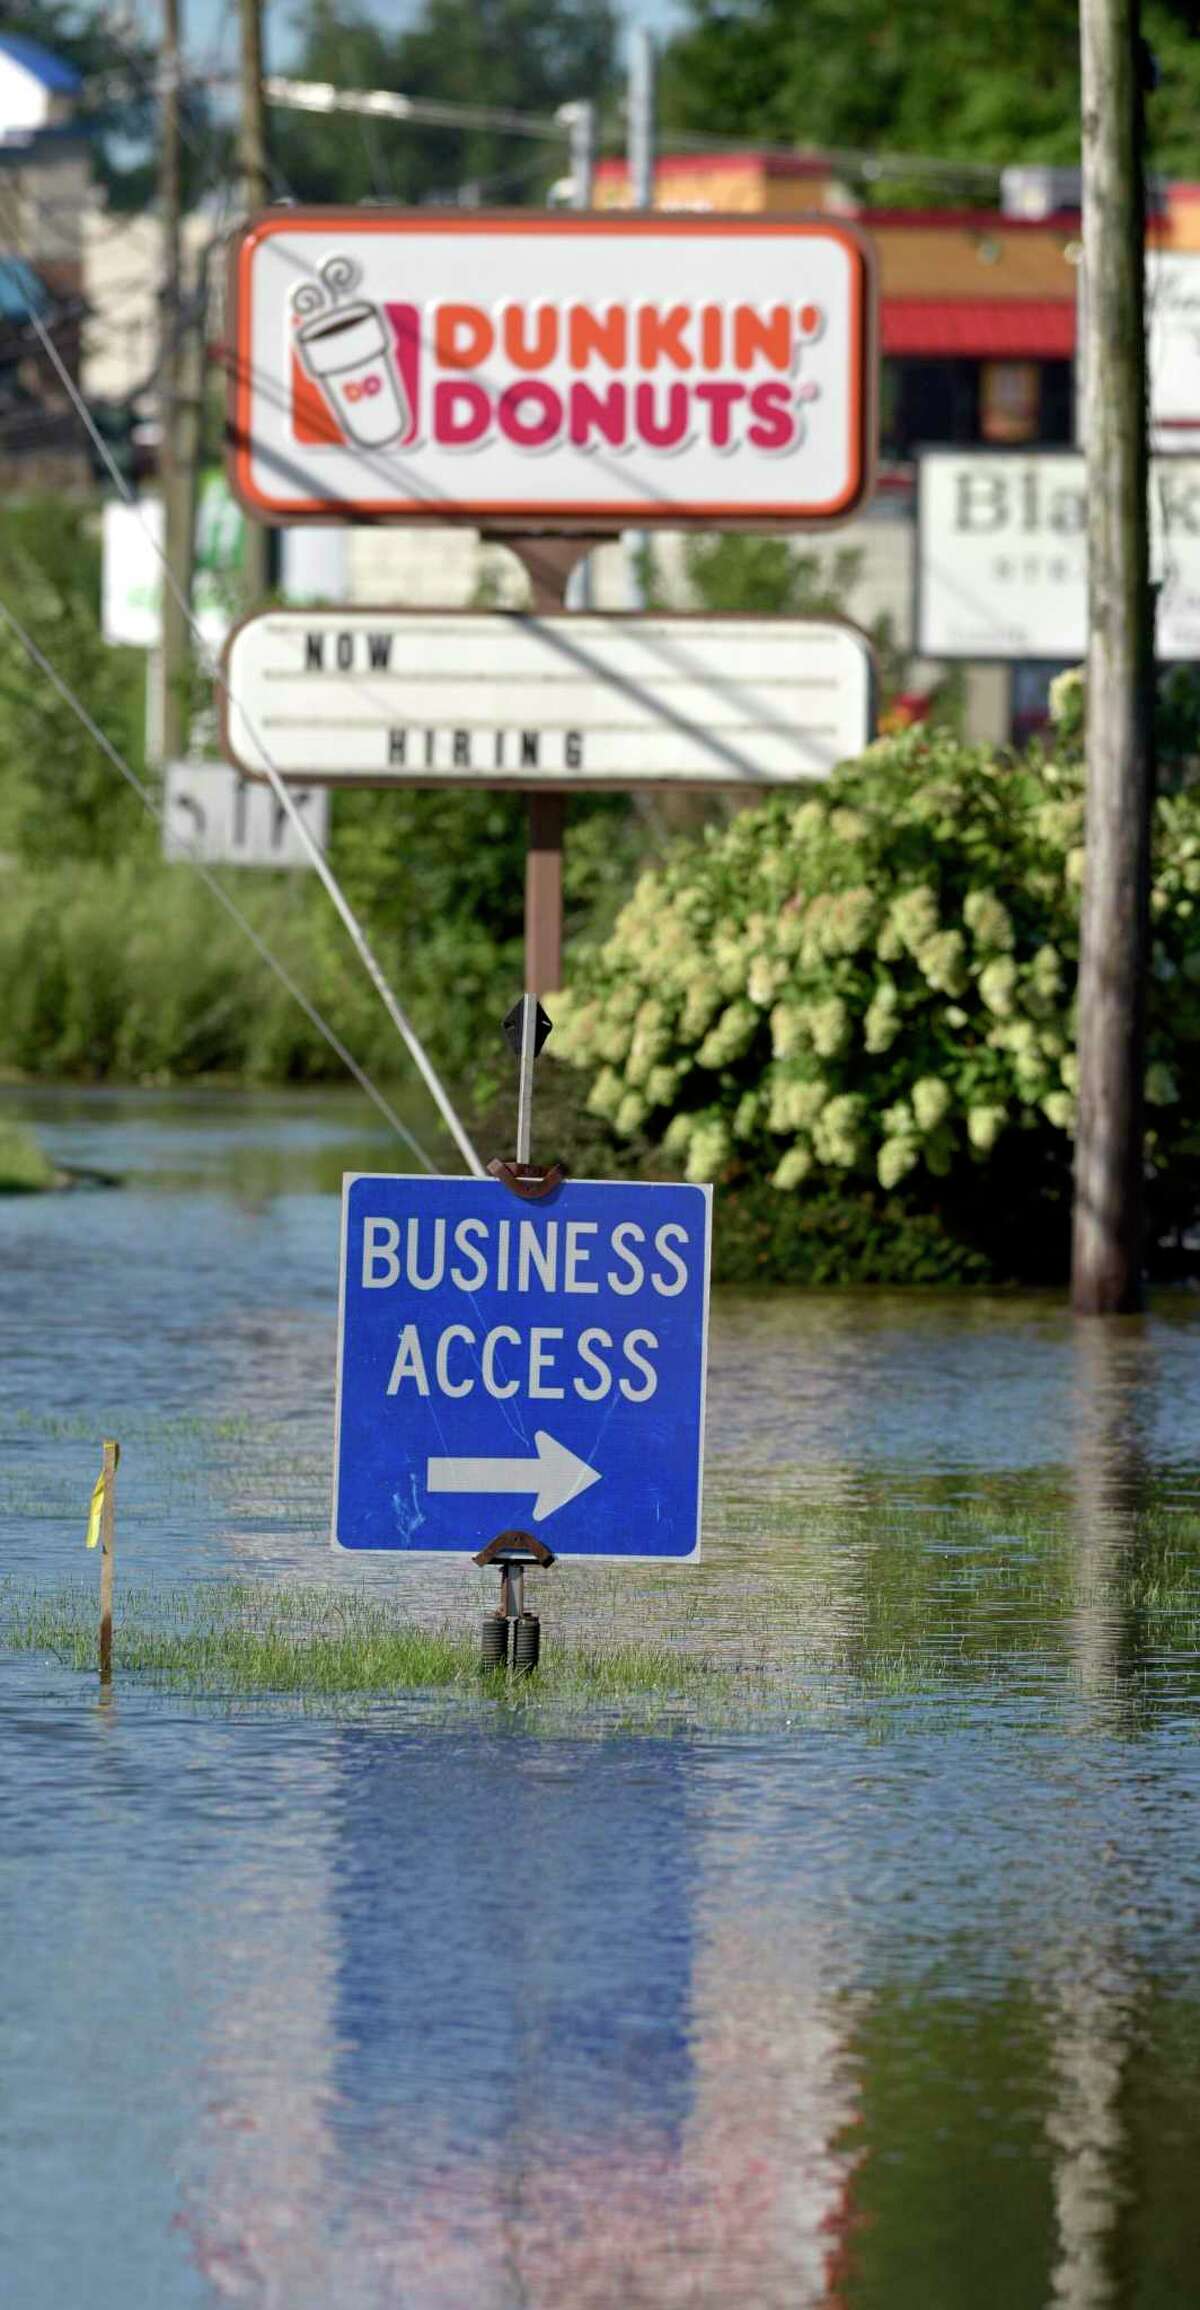 Newtown Road is blocked by overflowing water from Limekiln Brook in Danbury on Sept. 2, 2021. Remnants of hurricane Ida brought heavy rain and winds to Connecticut, and businesses in parts of the state are eligible for federal loans.